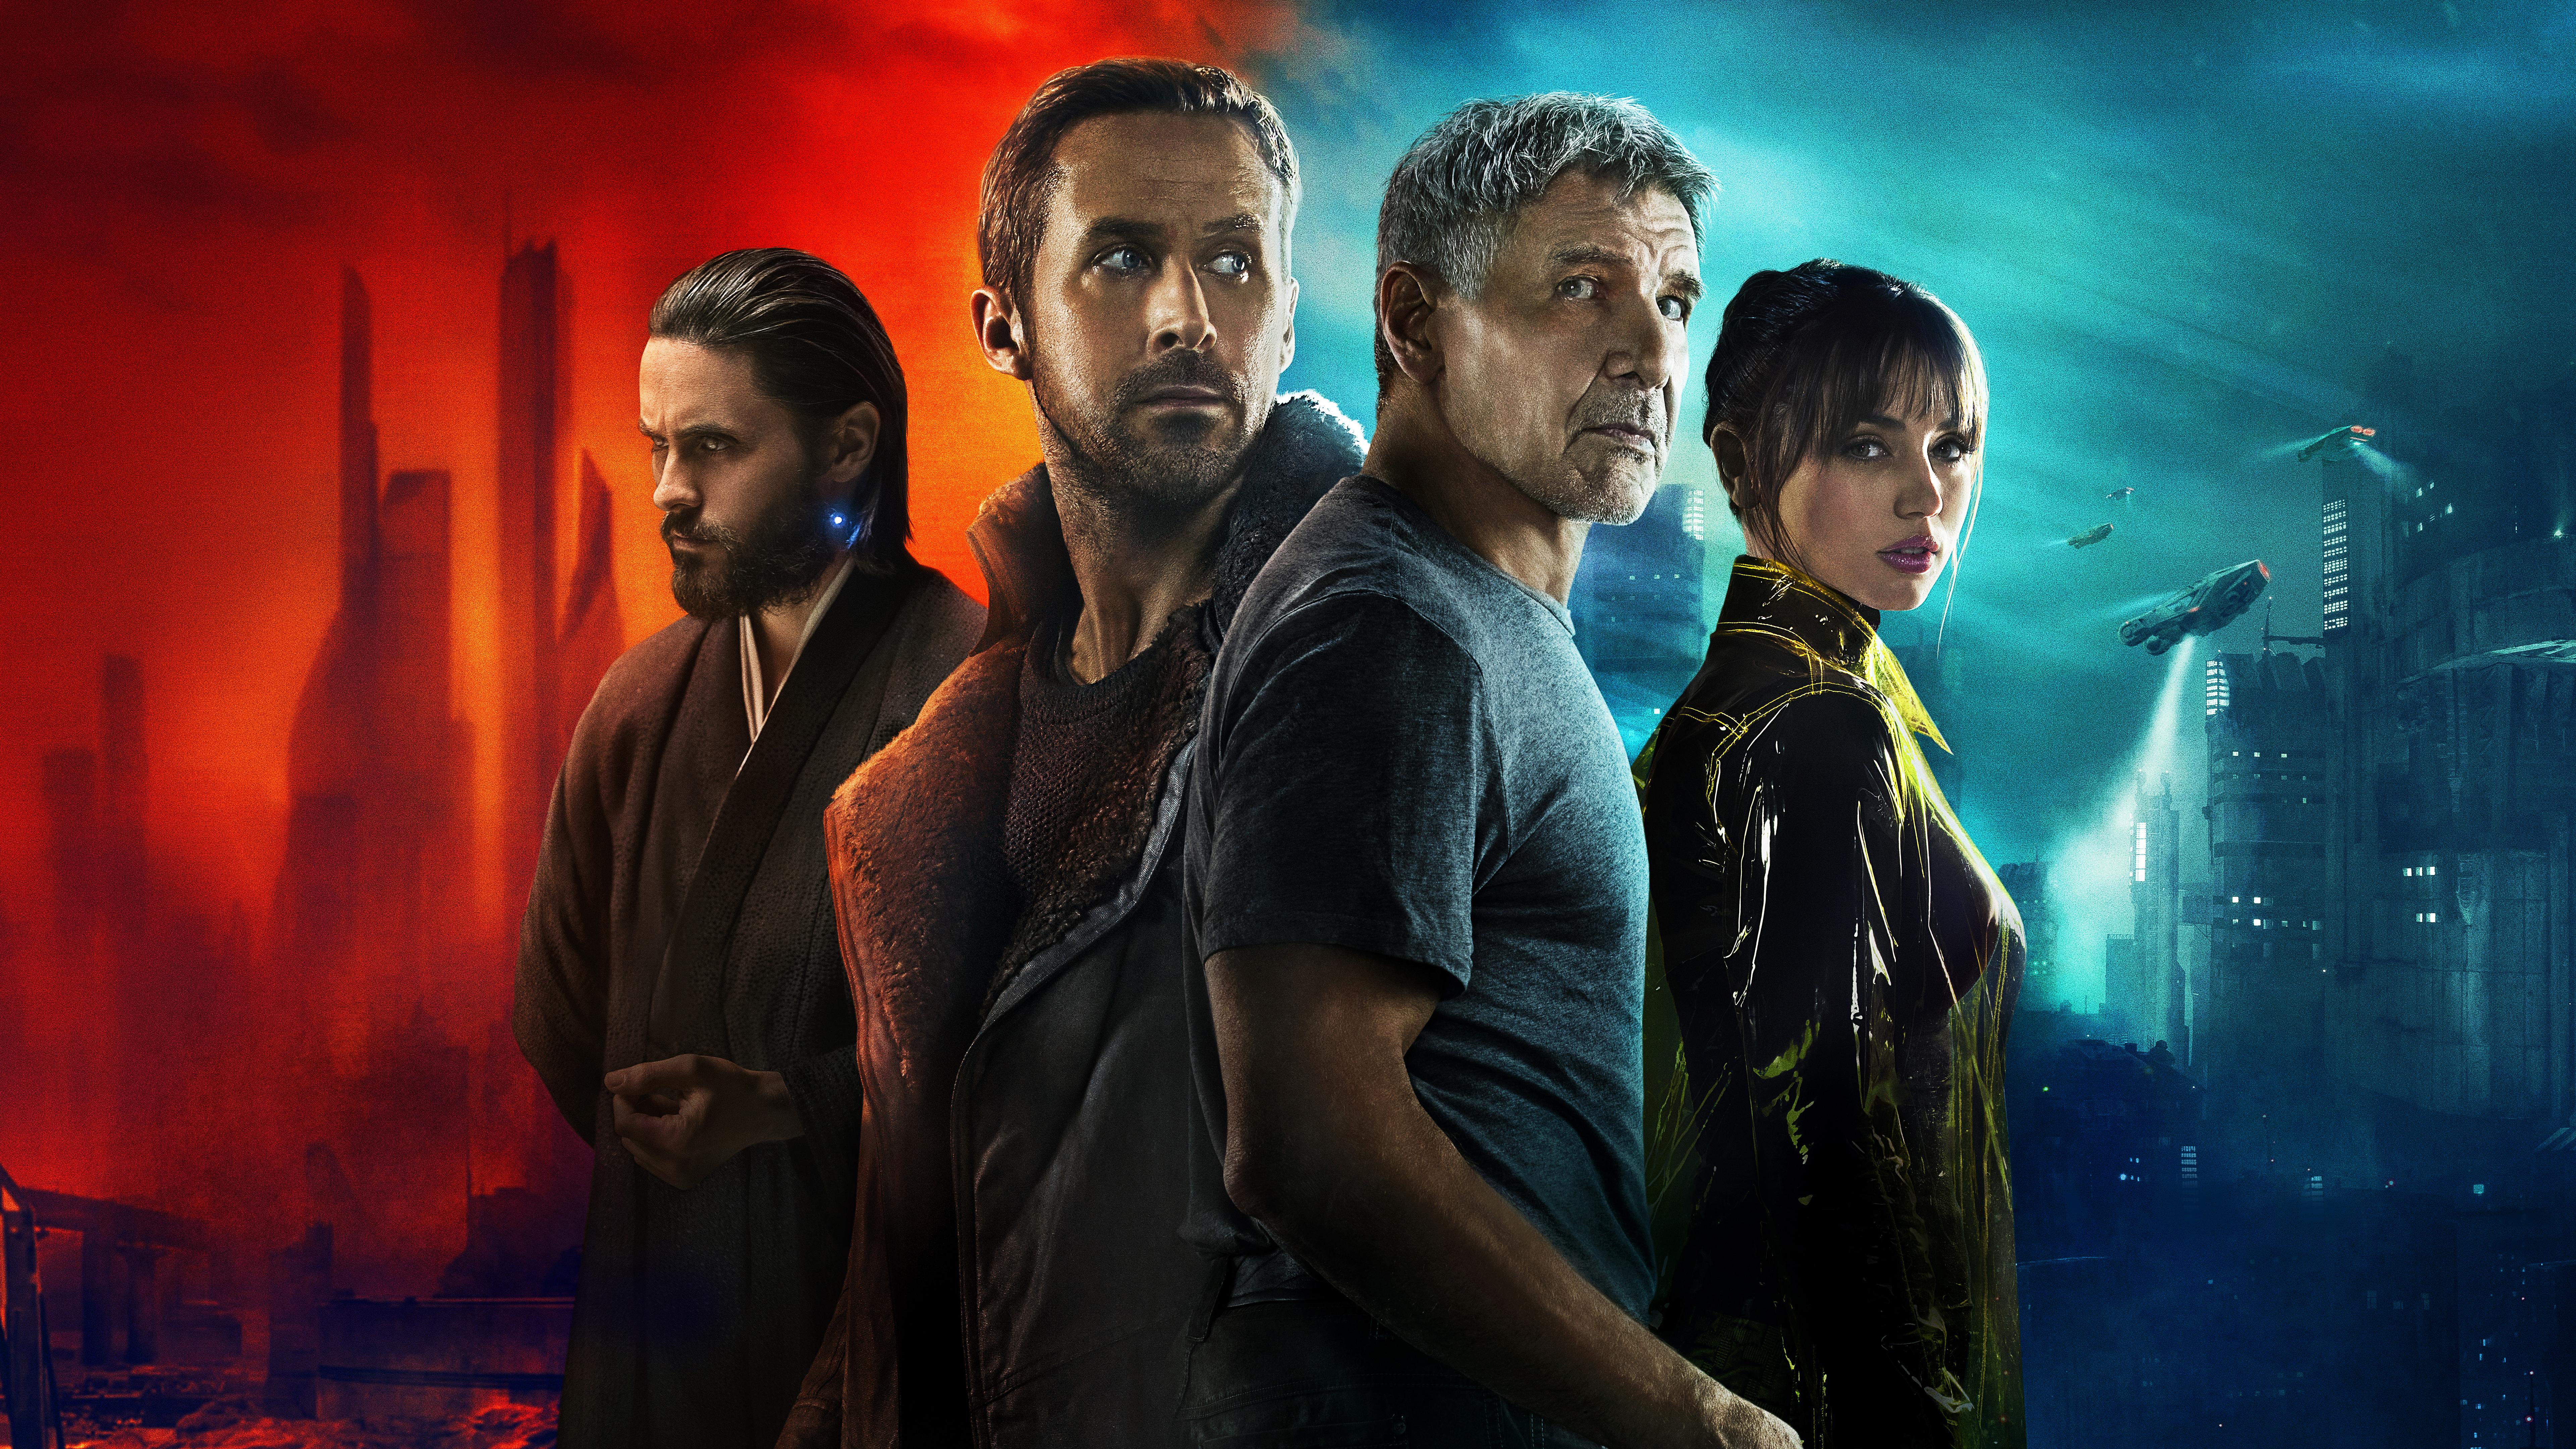 Blade Runner 2049 (2017) Review – A Worthy Sequel